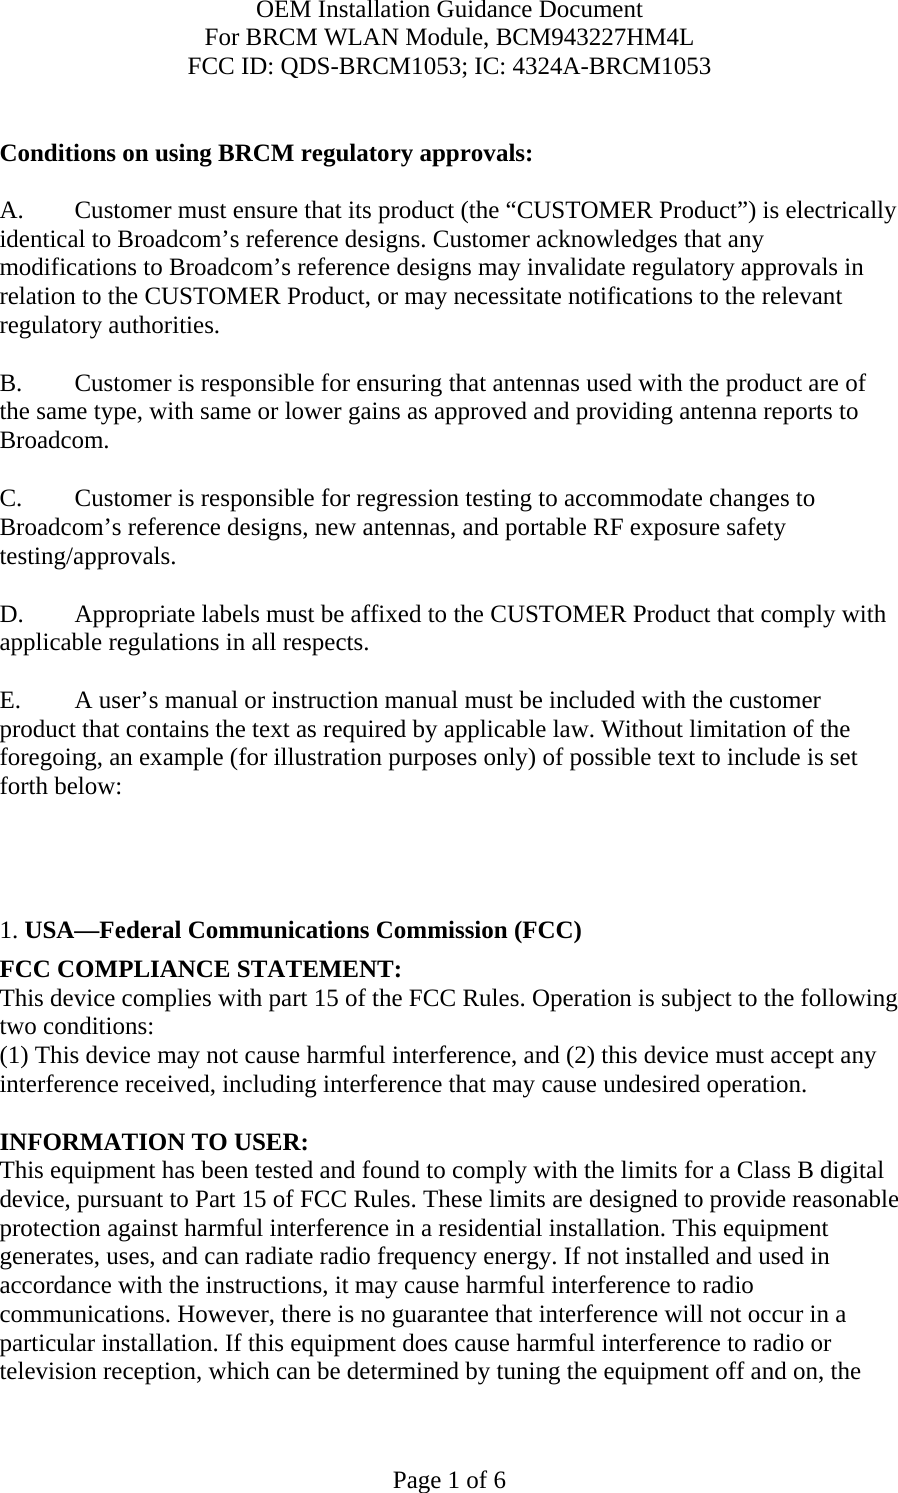 OEM Installation Guidance Document For BRCM WLAN Module, BCM943227HM4L FCC ID: QDS-BRCM1053; IC: 4324A-BRCM1053  Page 1 of 6  Conditions on using BRCM regulatory approvals:   A.  Customer must ensure that its product (the “CUSTOMER Product”) is electrically identical to Broadcom’s reference designs. Customer acknowledges that any modifications to Broadcom’s reference designs may invalidate regulatory approvals in relation to the CUSTOMER Product, or may necessitate notifications to the relevant regulatory authorities.  B.   Customer is responsible for ensuring that antennas used with the product are of the same type, with same or lower gains as approved and providing antenna reports to Broadcom.  C.   Customer is responsible for regression testing to accommodate changes to Broadcom’s reference designs, new antennas, and portable RF exposure safety testing/approvals.  D.  Appropriate labels must be affixed to the CUSTOMER Product that comply with applicable regulations in all respects.    E.  A user’s manual or instruction manual must be included with the customer product that contains the text as required by applicable law. Without limitation of the foregoing, an example (for illustration purposes only) of possible text to include is set forth below:       1. USA—Federal Communications Commission (FCC) FCC COMPLIANCE STATEMENT: This device complies with part 15 of the FCC Rules. Operation is subject to the following two conditions: (1) This device may not cause harmful interference, and (2) this device must accept any interference received, including interference that may cause undesired operation.  INFORMATION TO USER: This equipment has been tested and found to comply with the limits for a Class B digital device, pursuant to Part 15 of FCC Rules. These limits are designed to provide reasonable protection against harmful interference in a residential installation. This equipment generates, uses, and can radiate radio frequency energy. If not installed and used in accordance with the instructions, it may cause harmful interference to radio communications. However, there is no guarantee that interference will not occur in a particular installation. If this equipment does cause harmful interference to radio or television reception, which can be determined by tuning the equipment off and on, the 